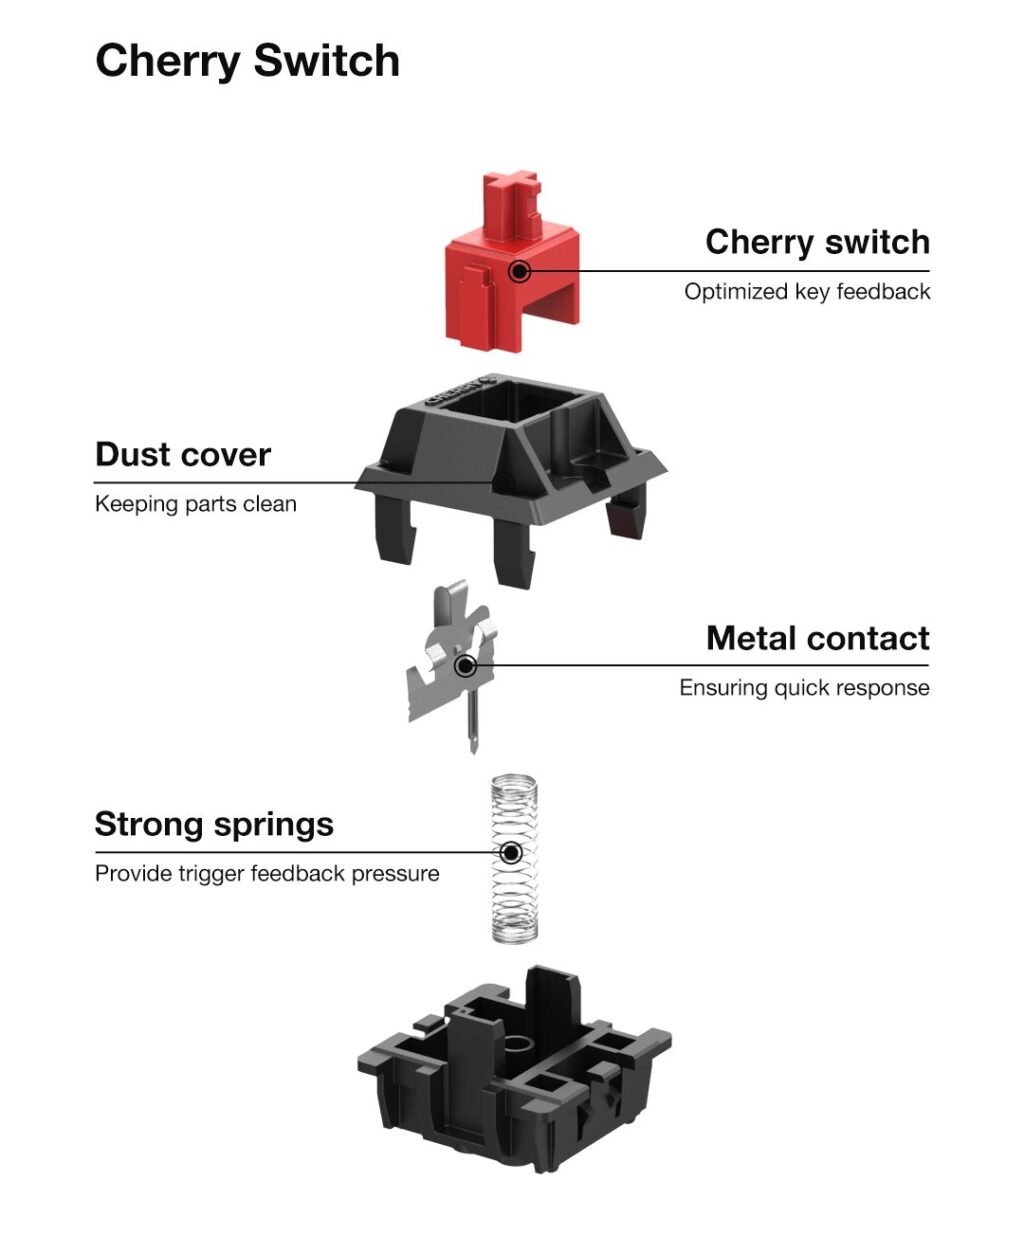 Components of a Cherry MX Switch